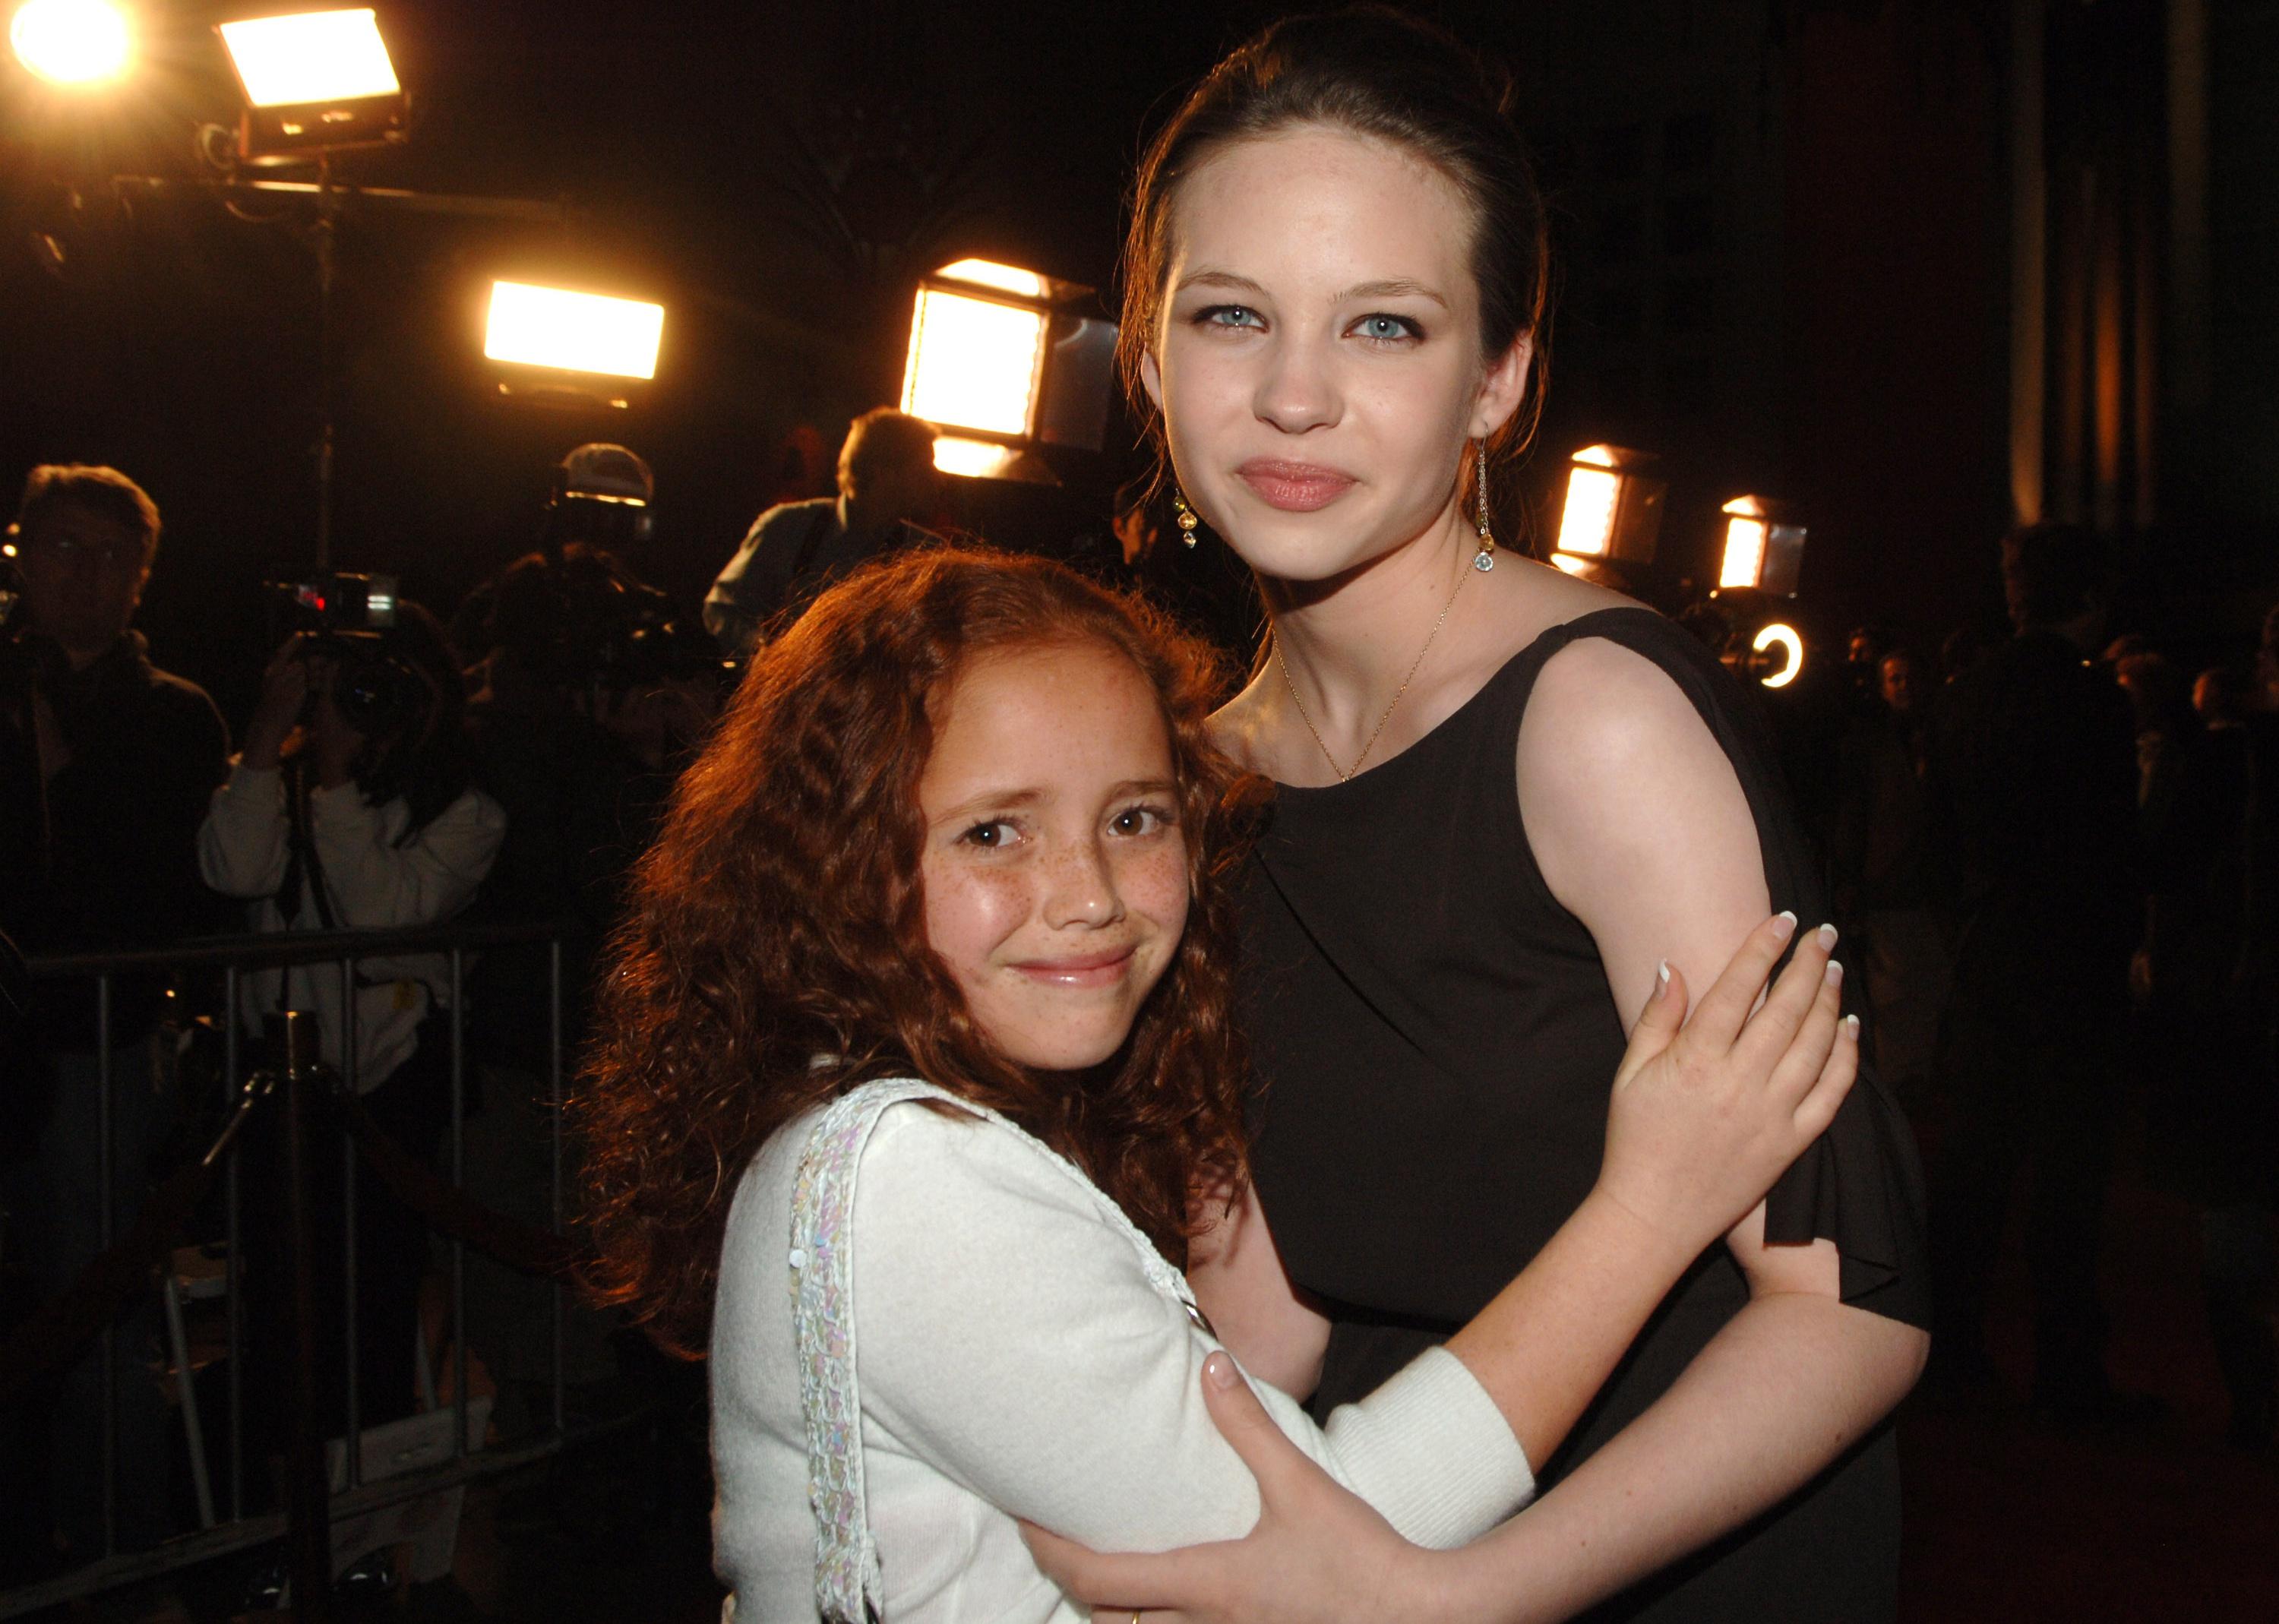 Jolean Wejbe and Daveigh Chase during HBO Original Series "Big Love" Premiere